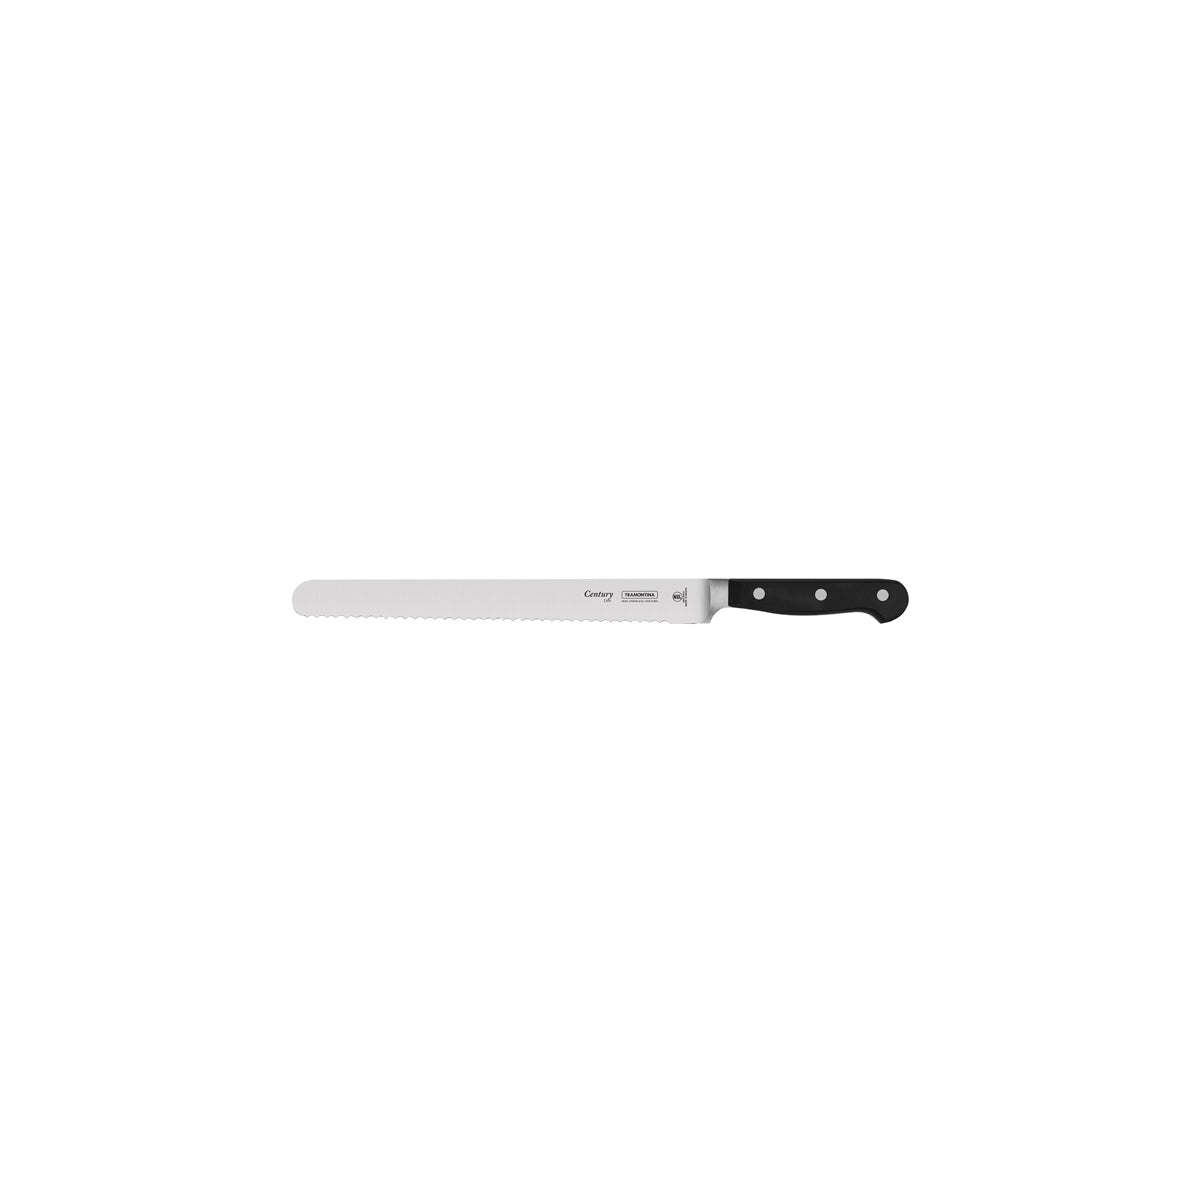 TM24012/010 Tramontina Century Pastry Knife Serrated Blade with Forged Handle Black 254mm Tomkin Australia Hospitality Supplies